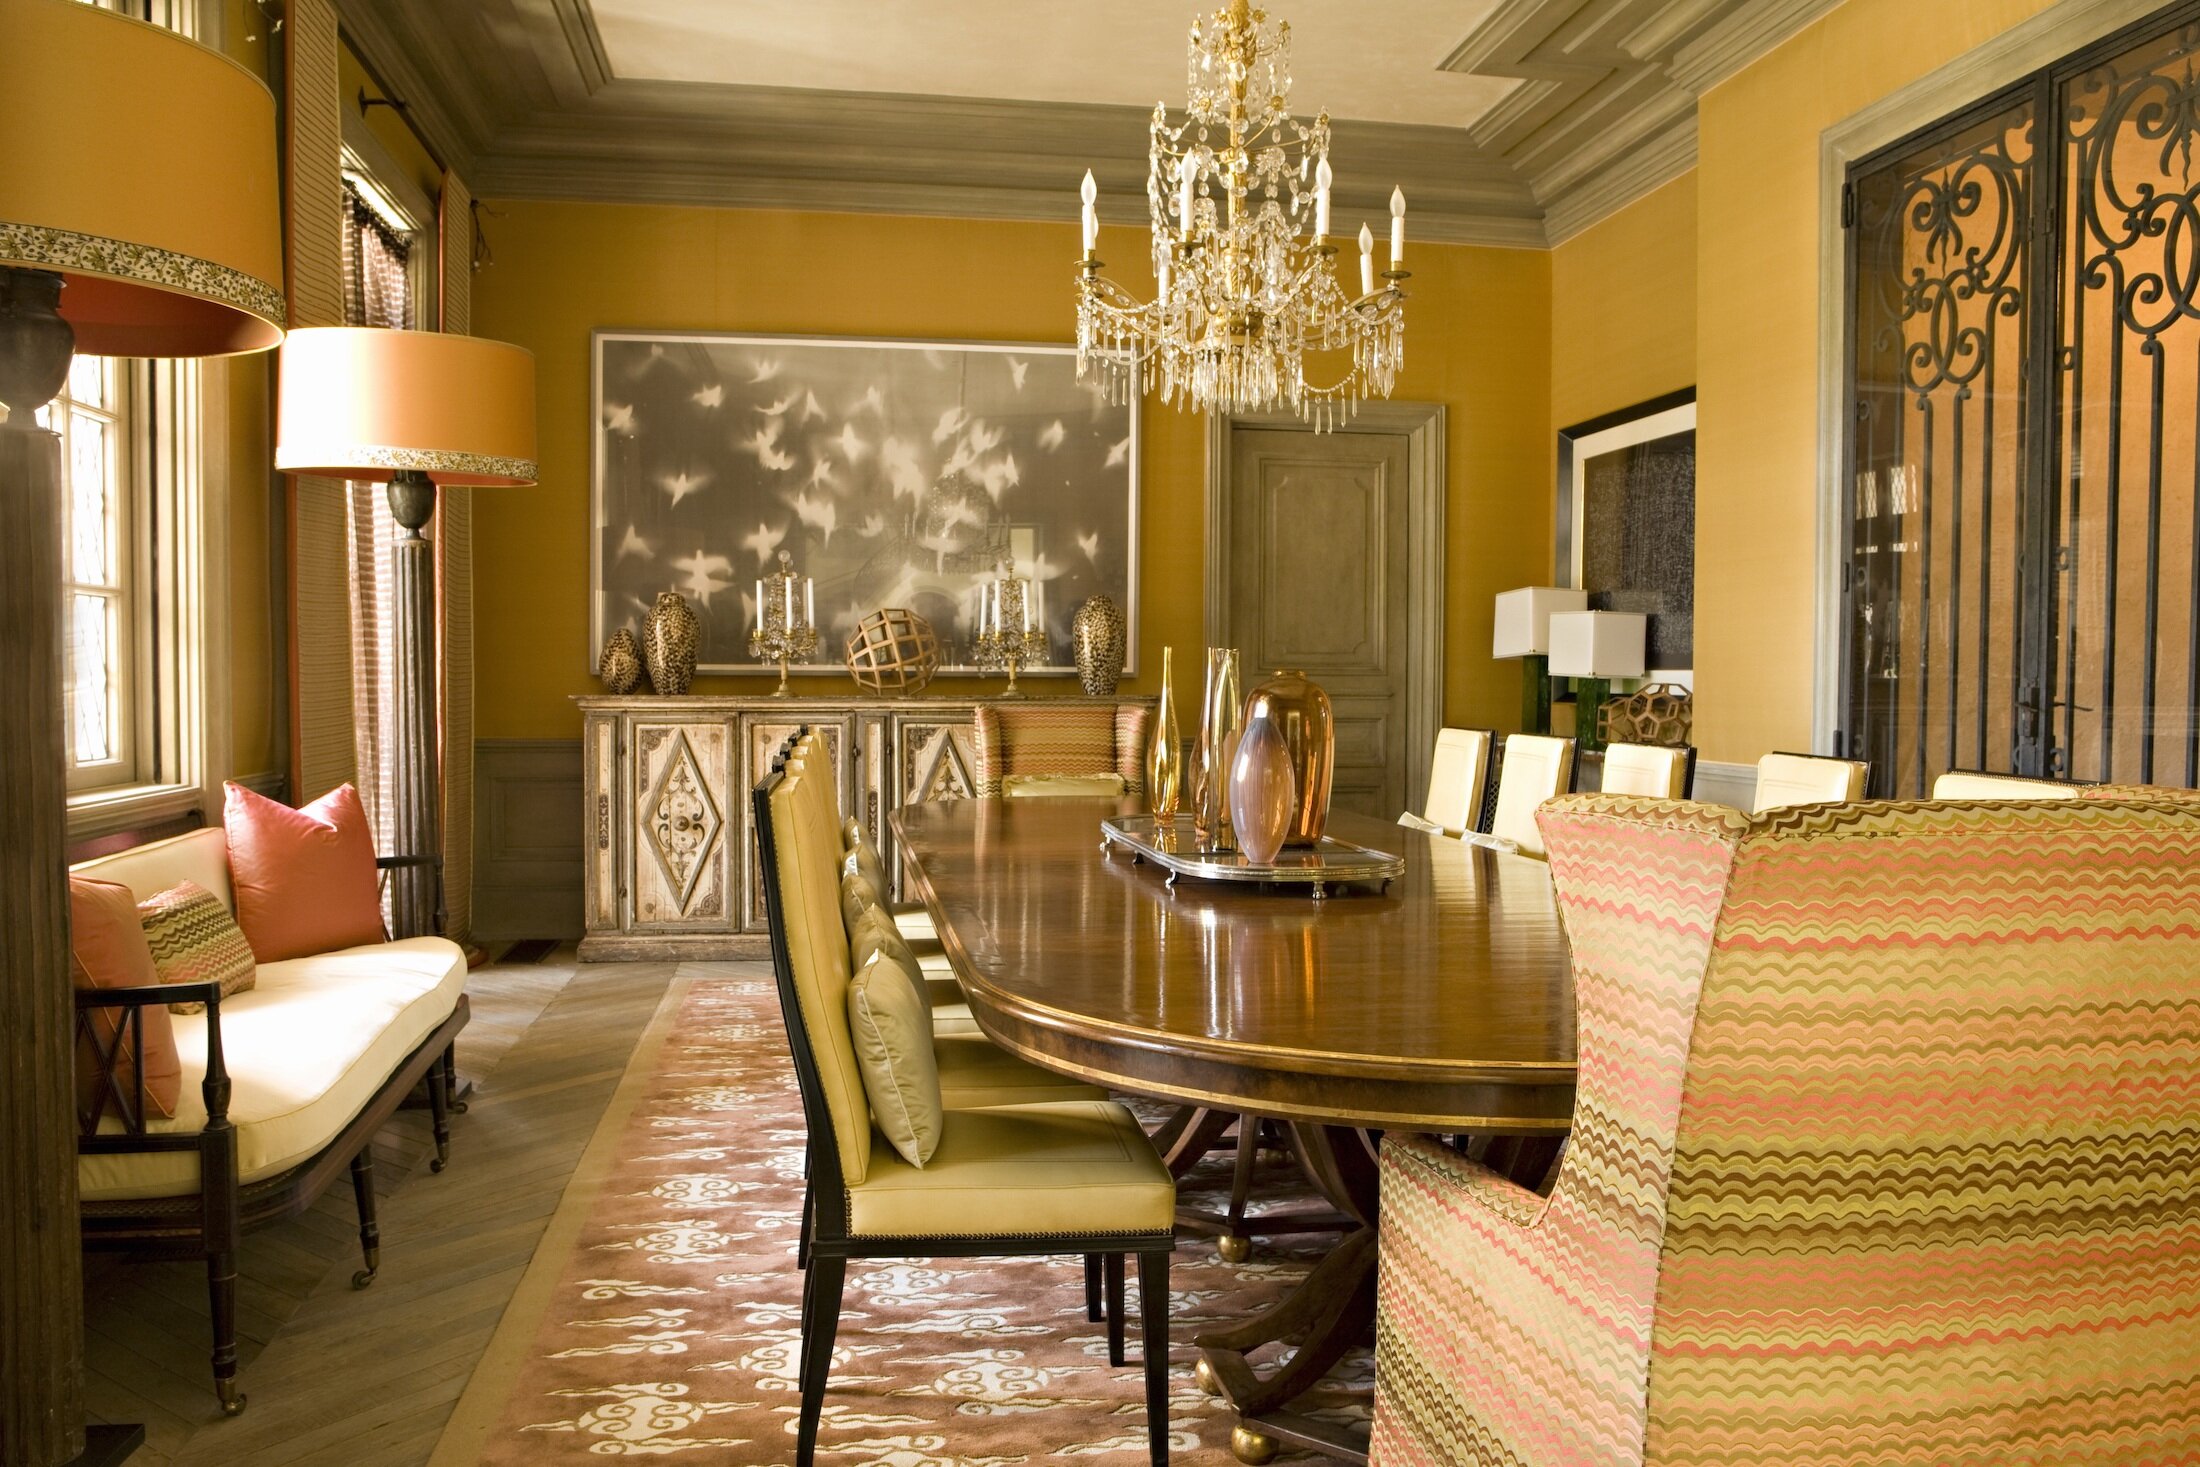 A Formal Dining Room with reclaimed French oak  floors, upholstered  dining chairs and upholstered walls.